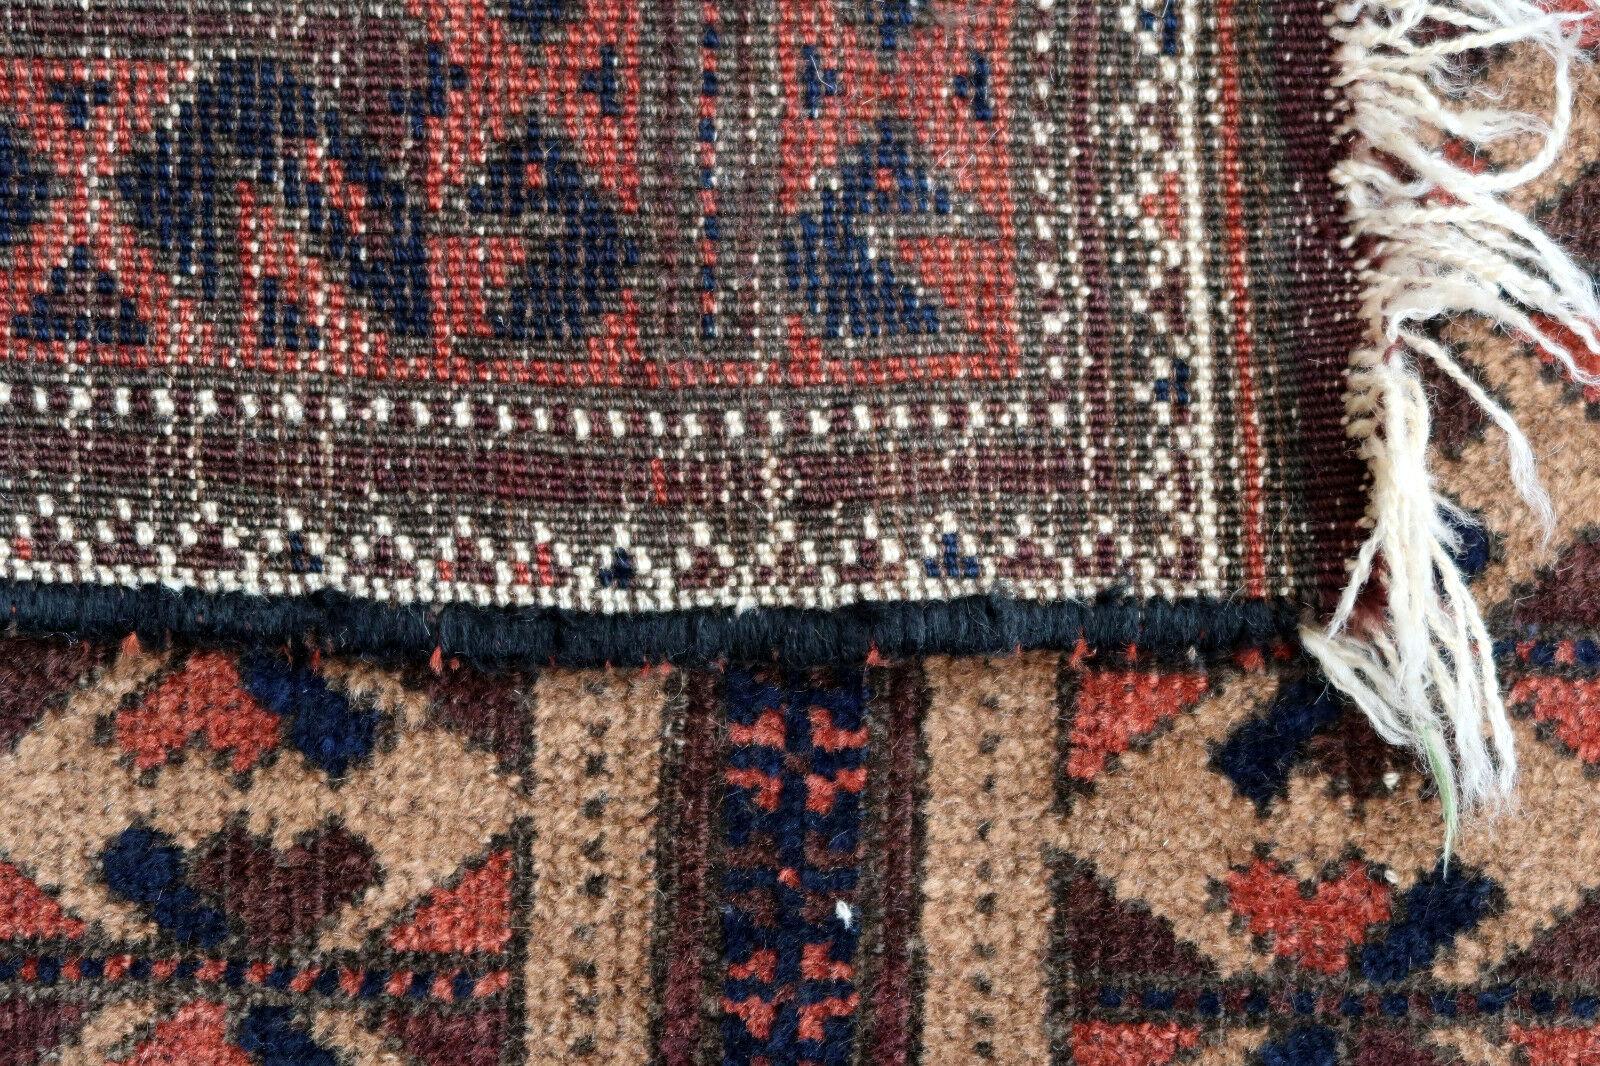 Handmade antique Baluch rug from Central Asia in original good condition. The rug is from the beginning of 20th century.

-condition: original, some age wear,

-circa: 1900s,

-size: 3' x 5.2' (92cm x 160cm),

-material: wool,

-country of